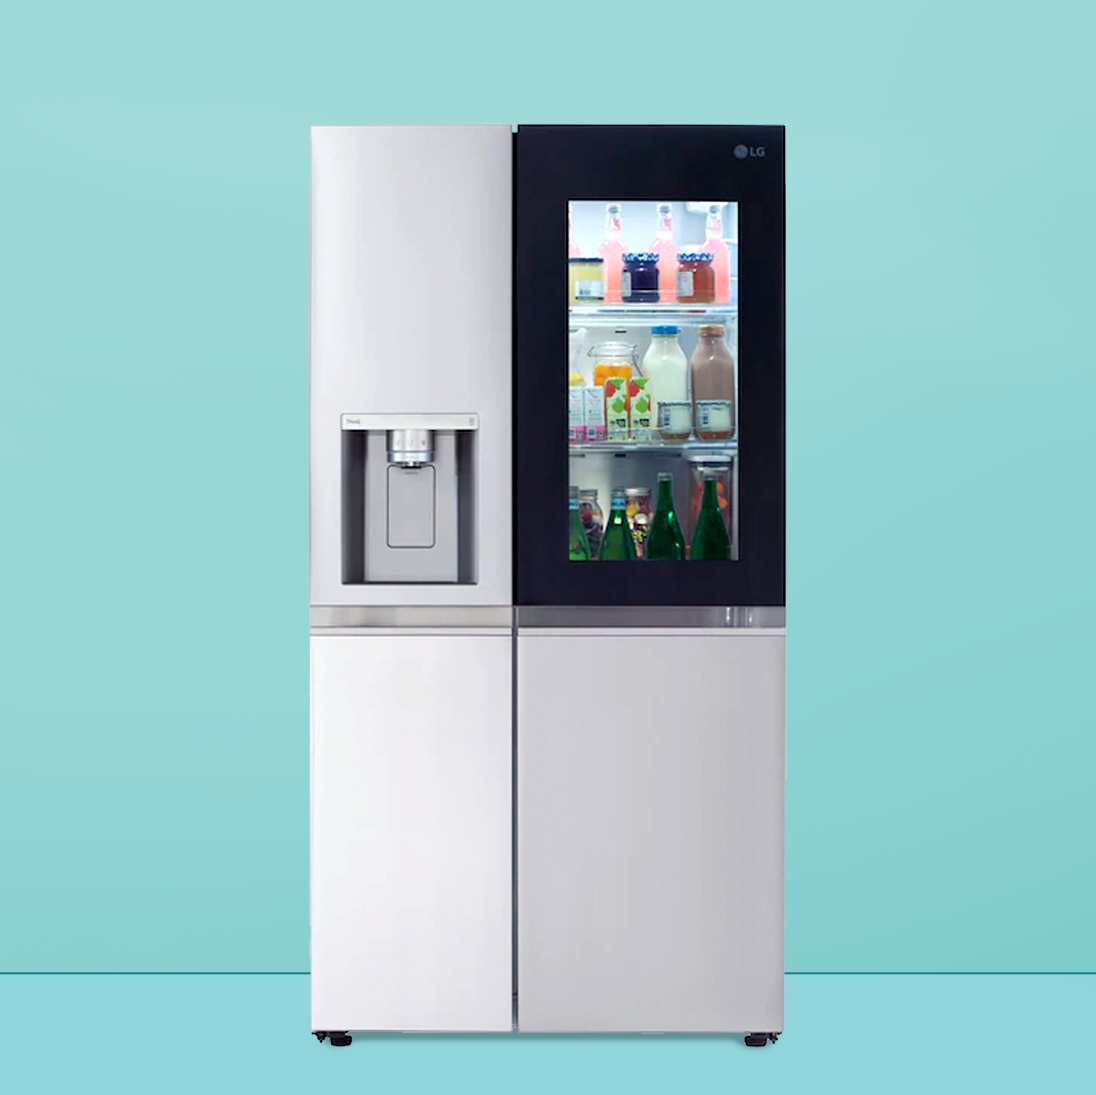 https://hips.hearstapps.com/hmg-prod/images/gh-050122-best-smart-refrigerators-1651503837.png?crop=0.548xw:0.842xh;0.250xw,0.0468xh&resize=1200:*